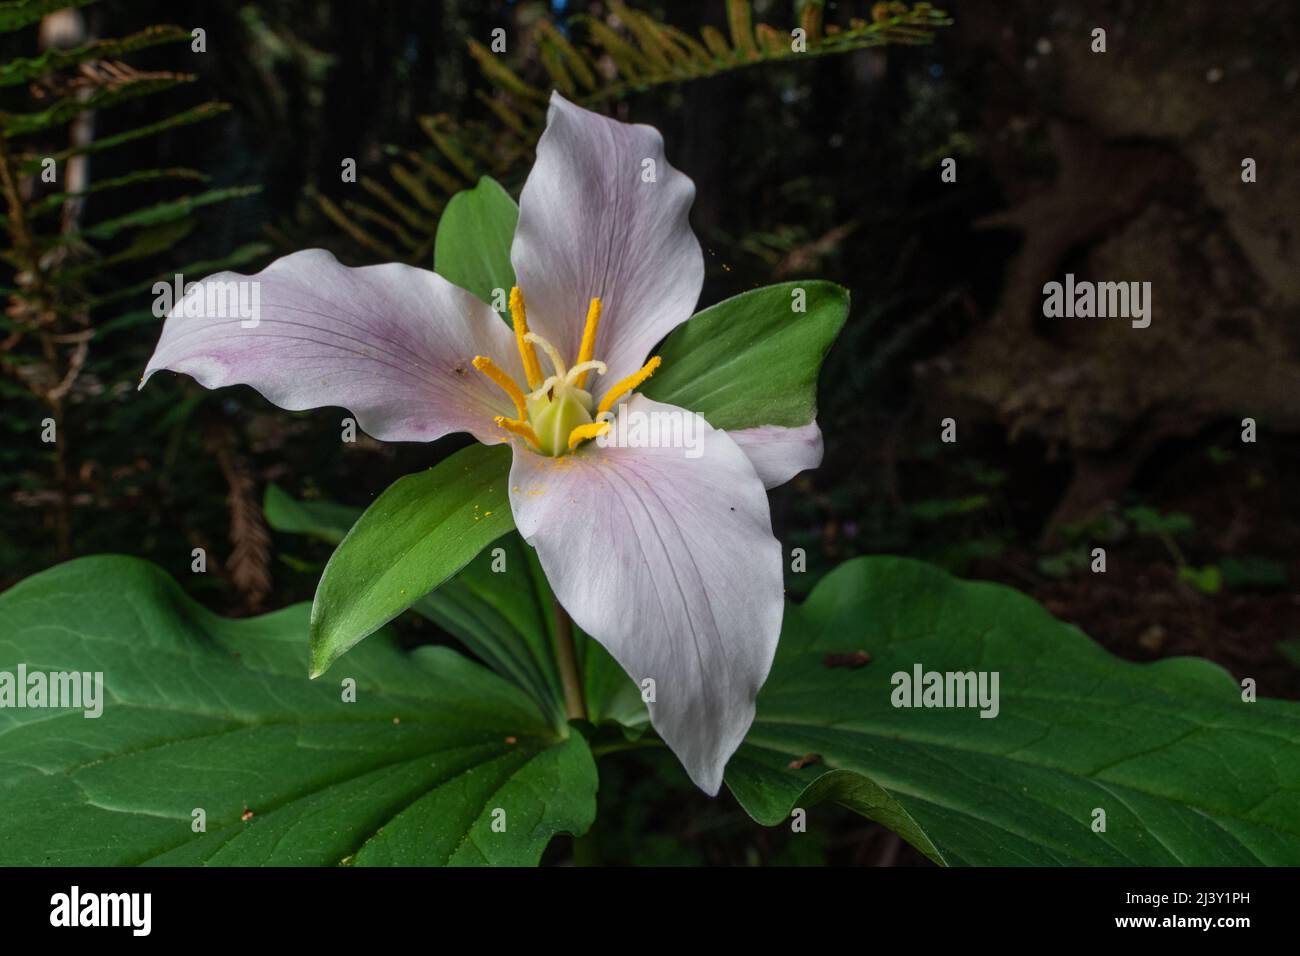 Trillium ovatum, the Pacific trillium, growing and flowering on the forest floor in a old growth redwood forest in Northern California. Stock Photo